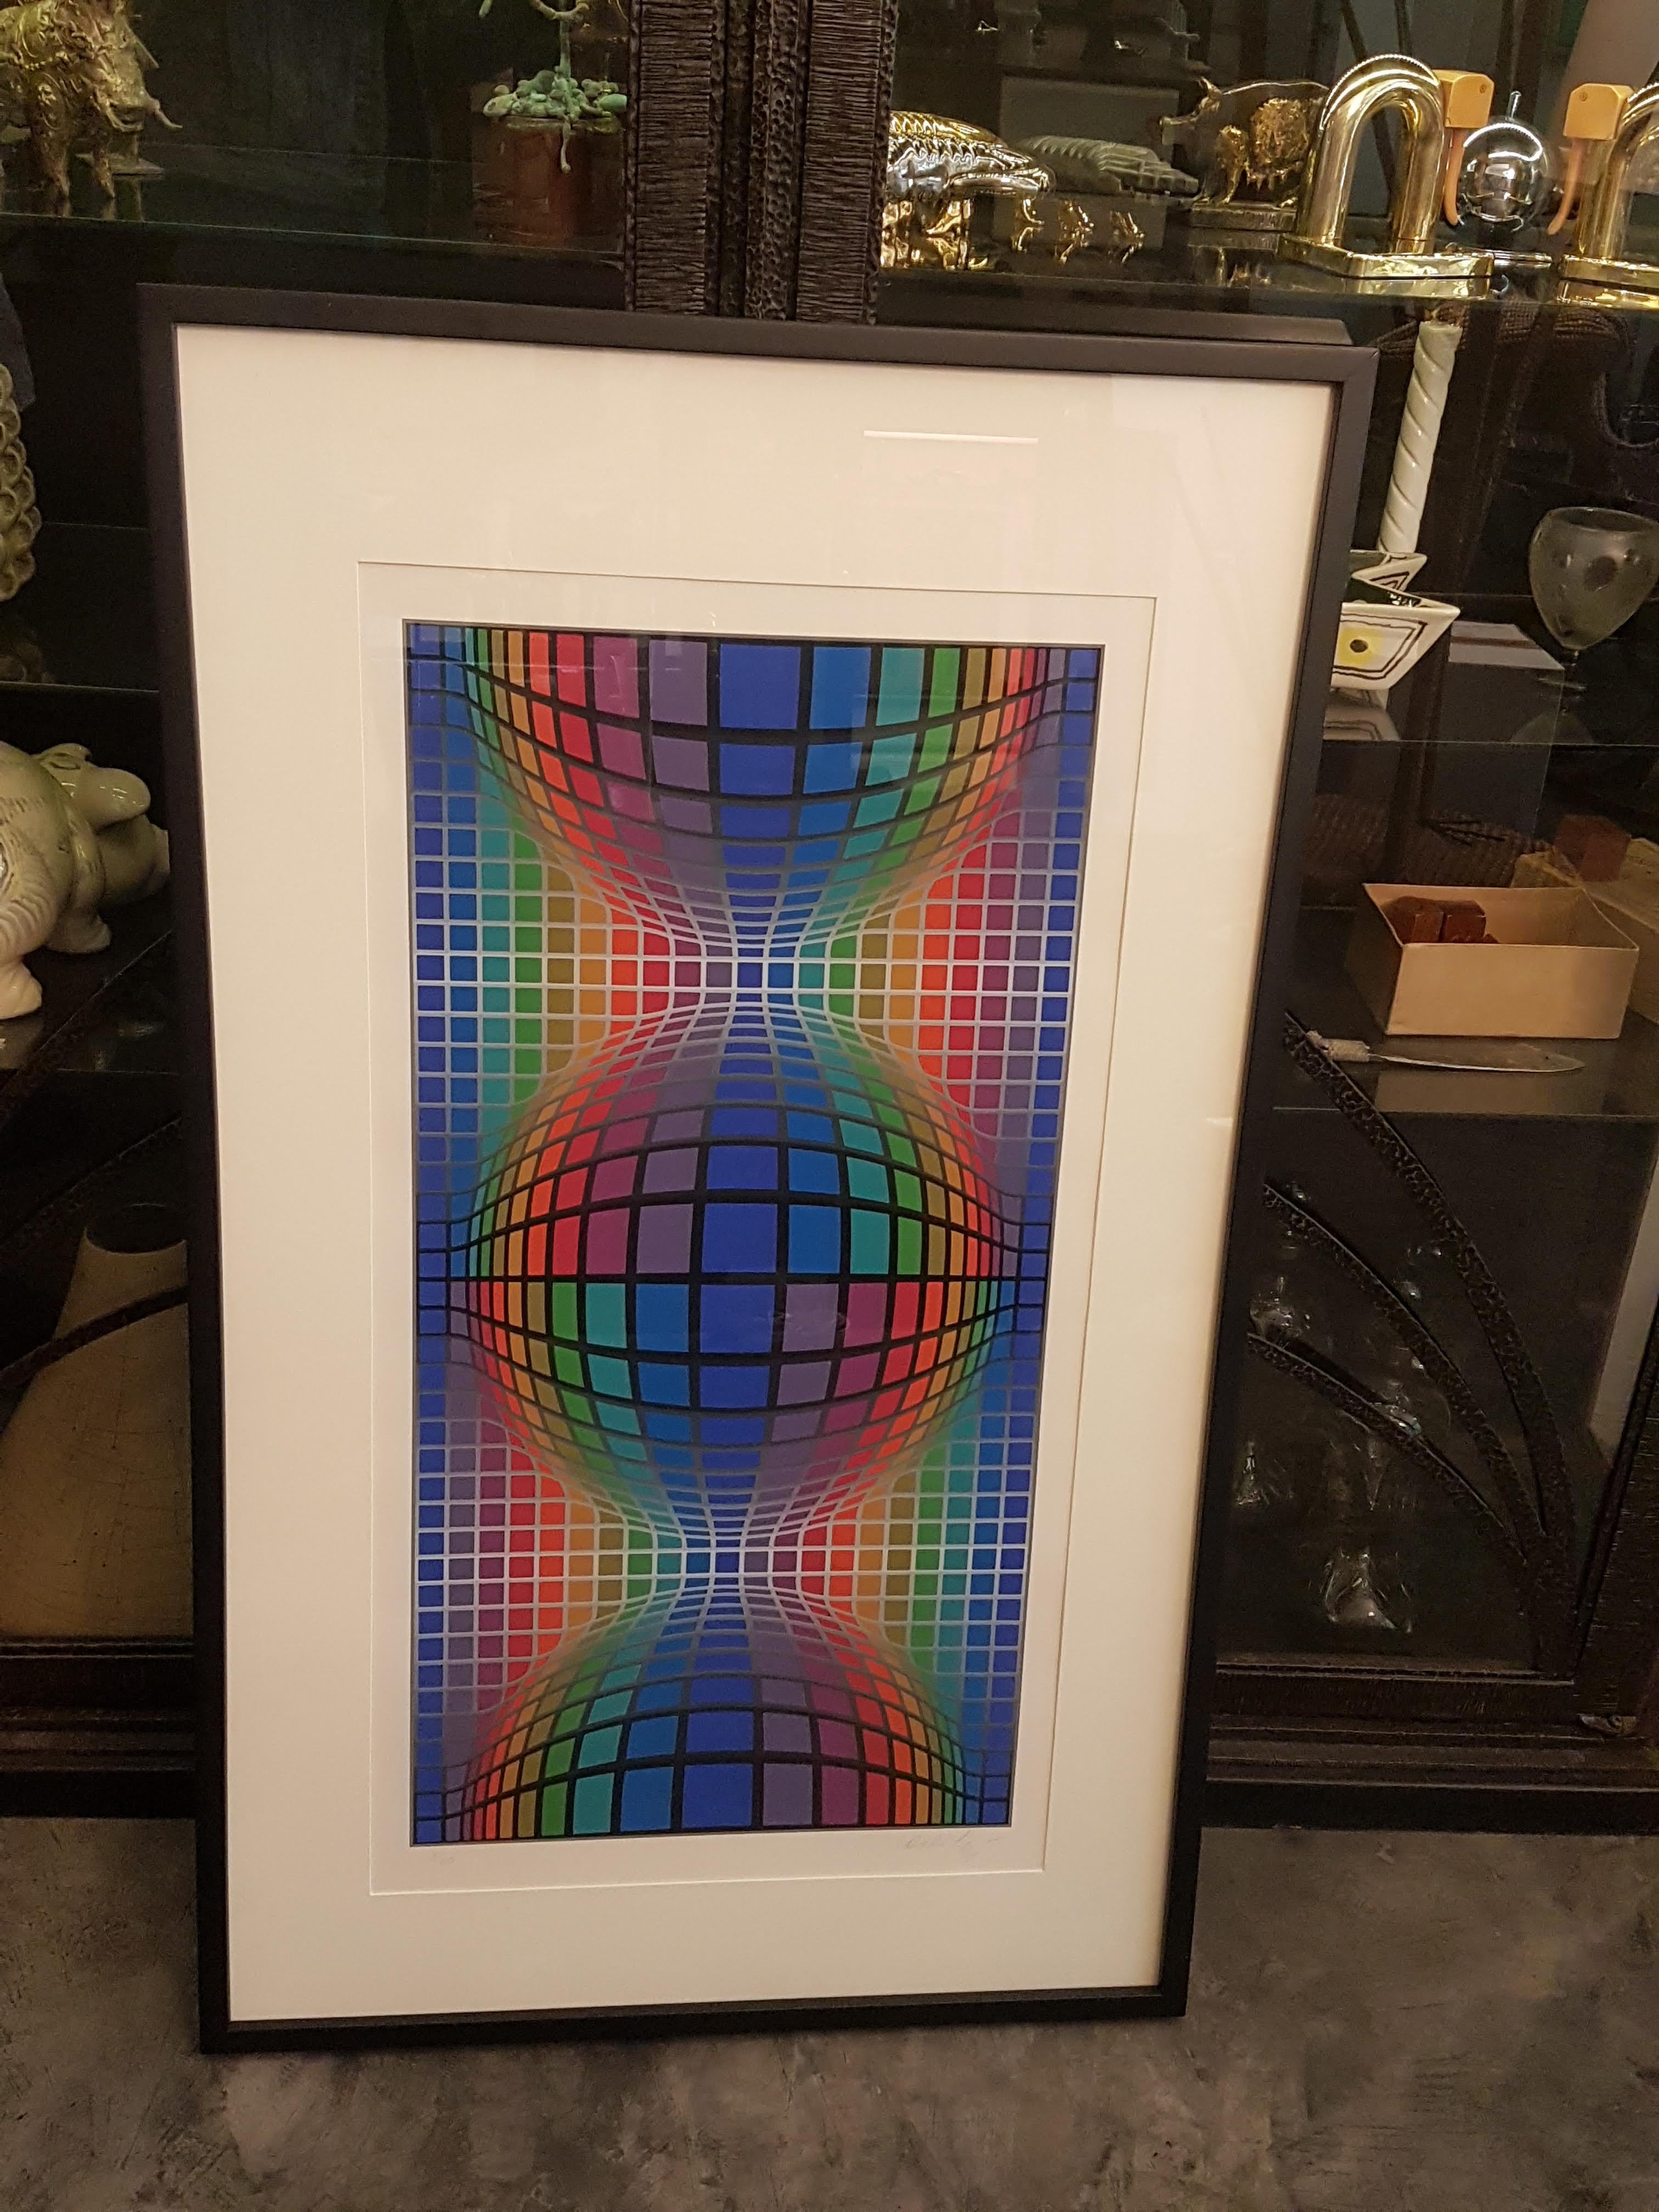 A beautiful silkscreen print by Hungary-born French artist Victor Vasarely. Series 3/250. Signed by the artist.

Print's dimensions: 82 x 41 cm. (32.25 x 16.125 inches).